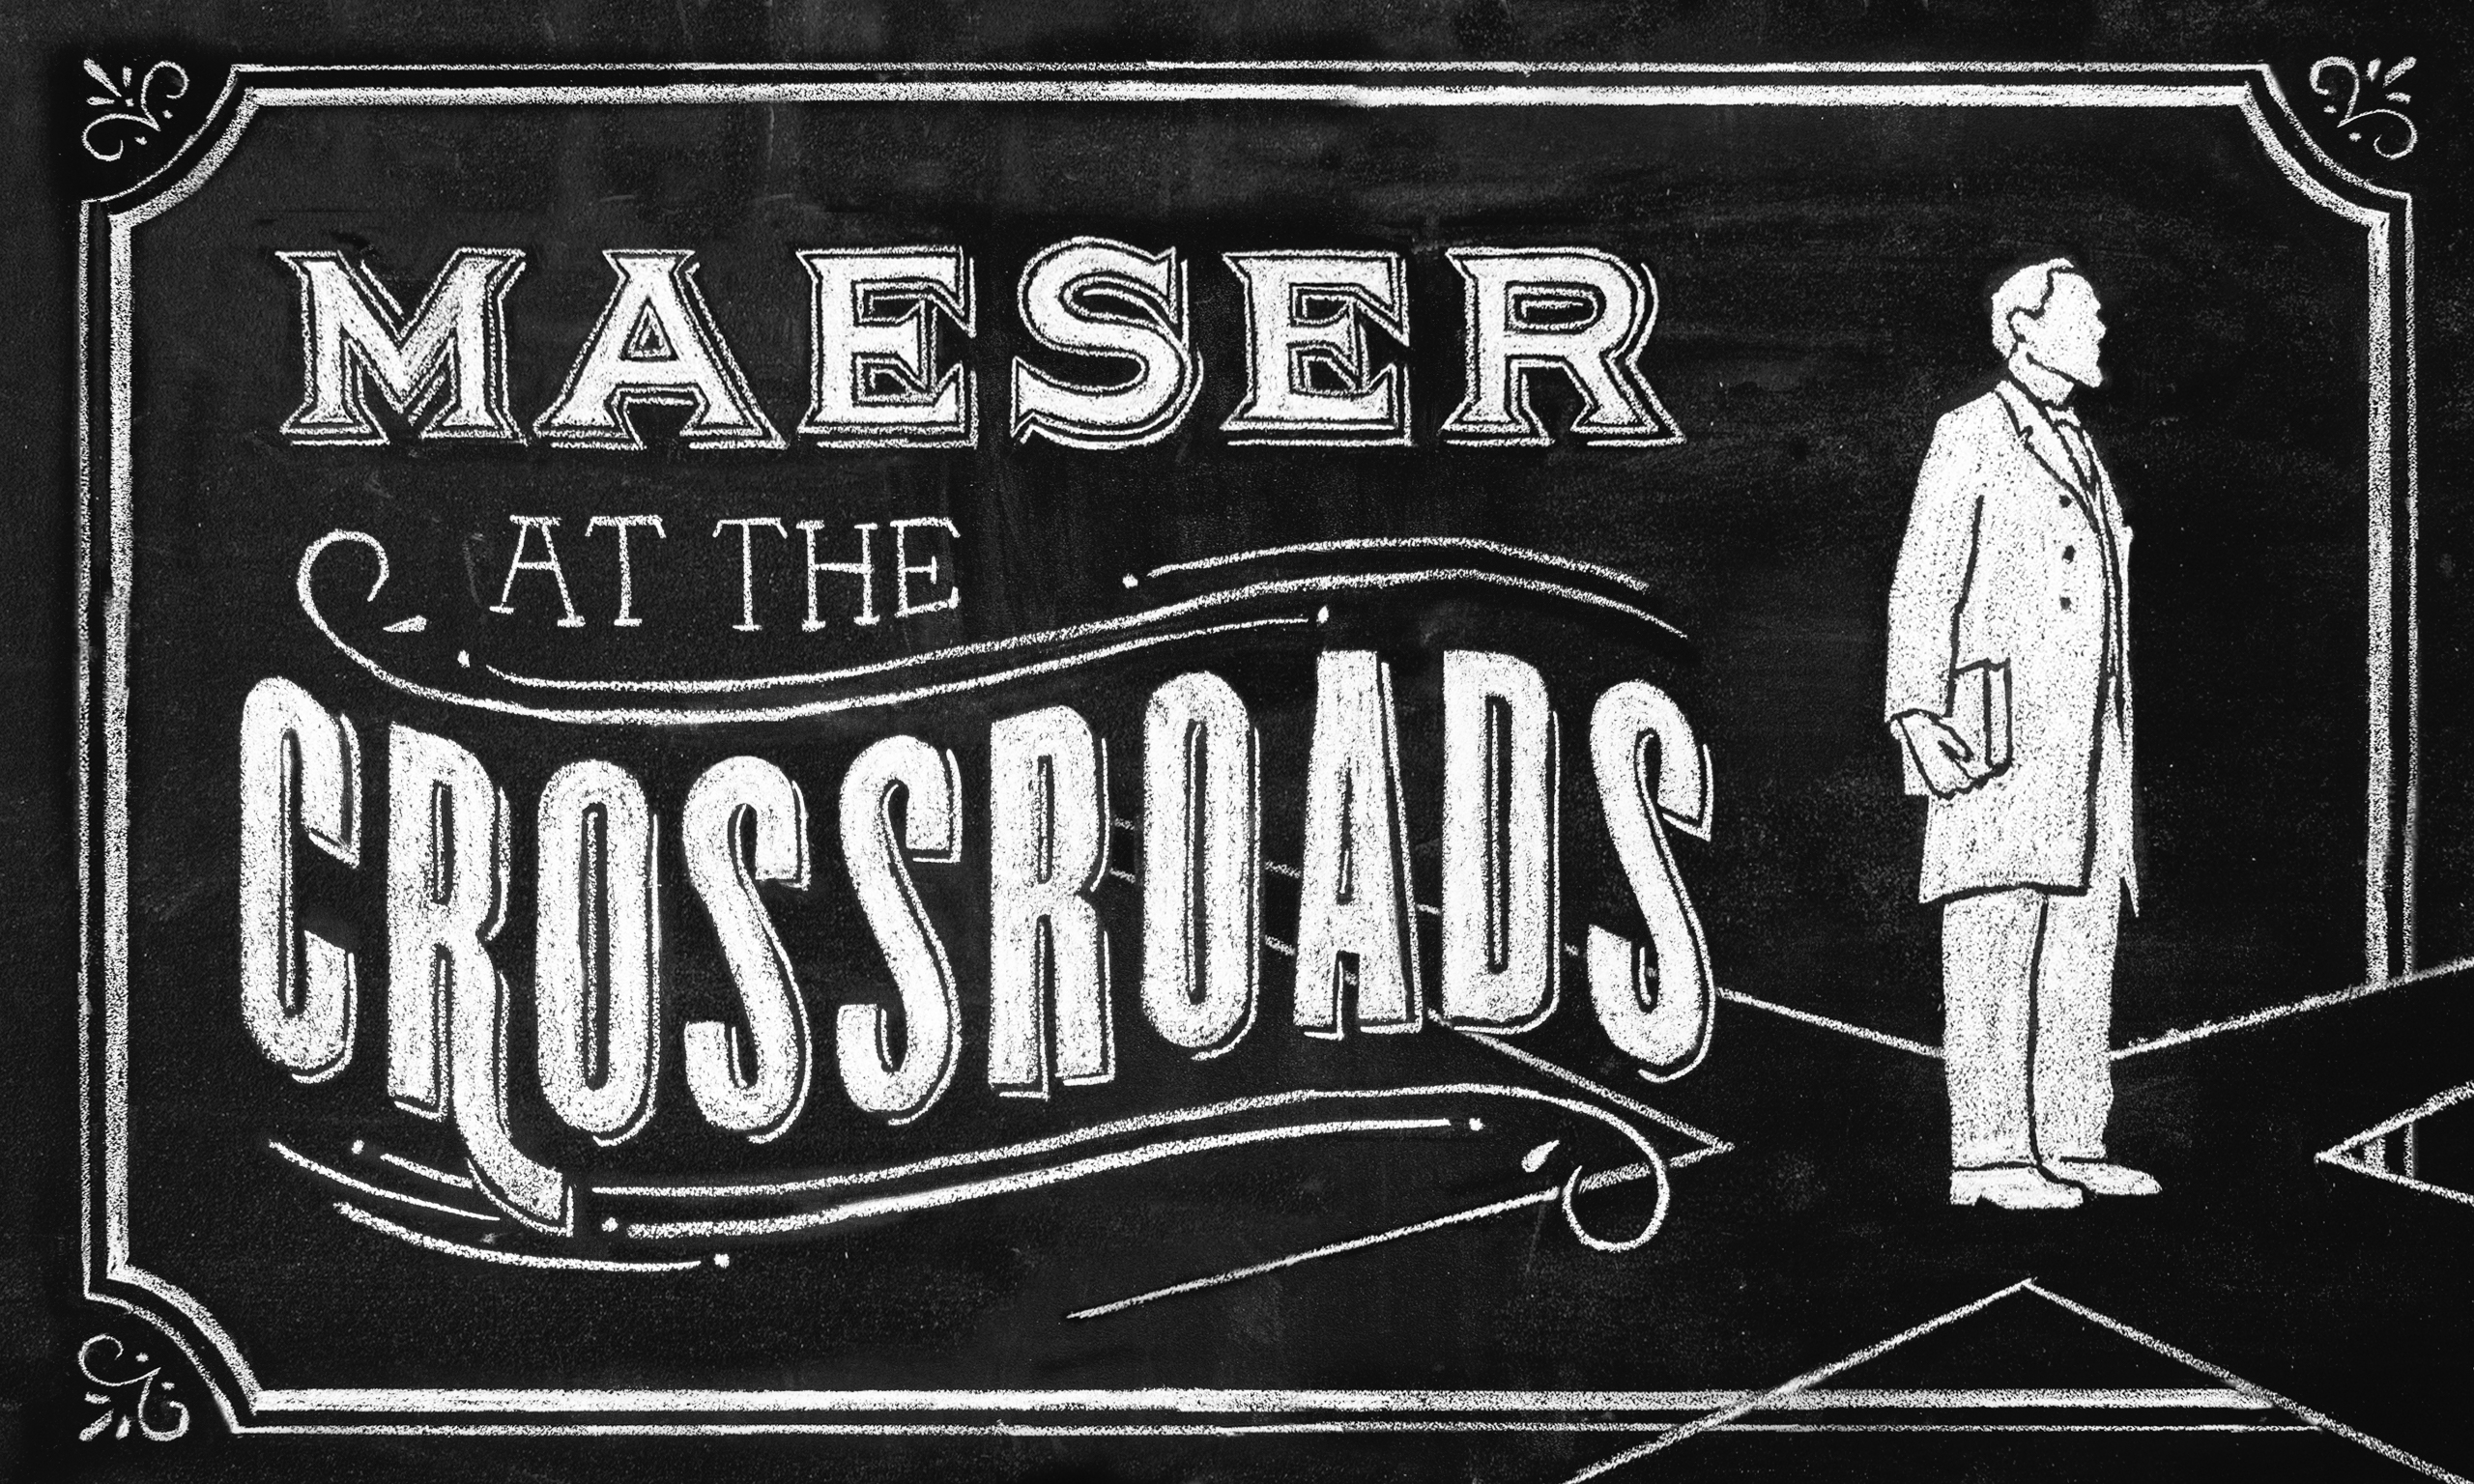 A black and white photo of text that reads "Maeser at the Crossroads" with a white illustration of Karl Maeser.